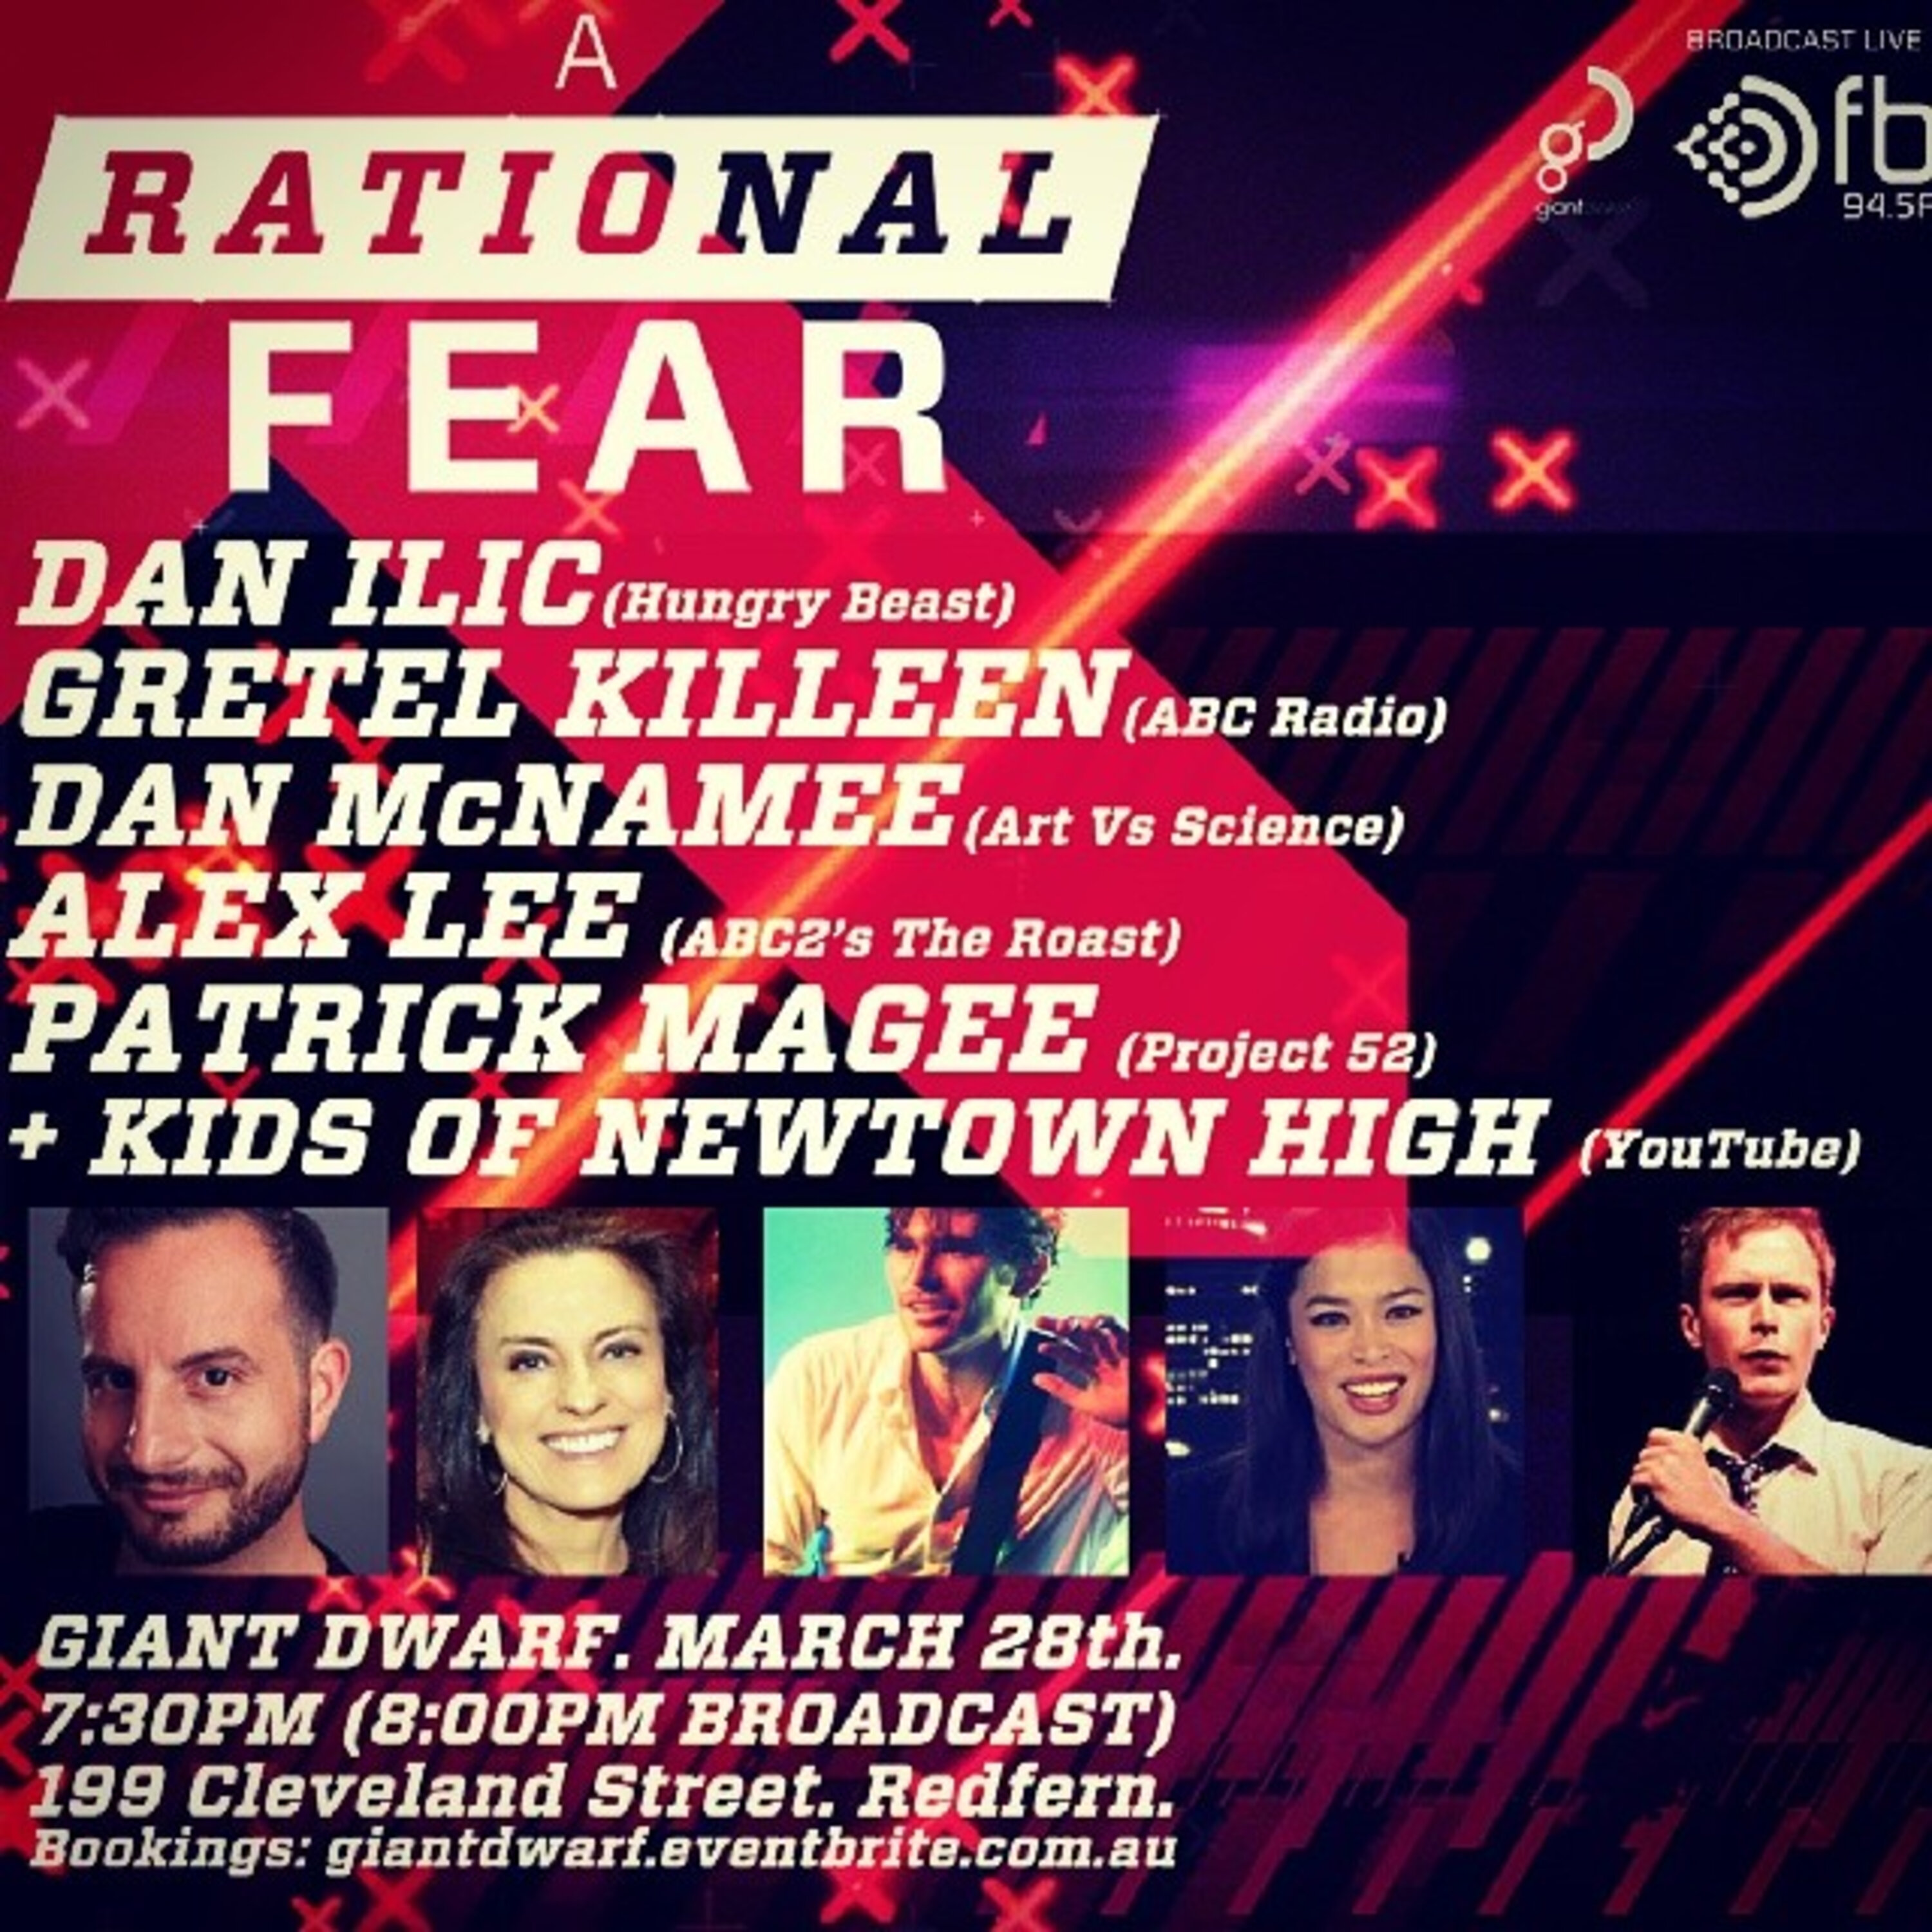 #016 - March 28th 2014 - A Rational Fear - BETTER QUALITY